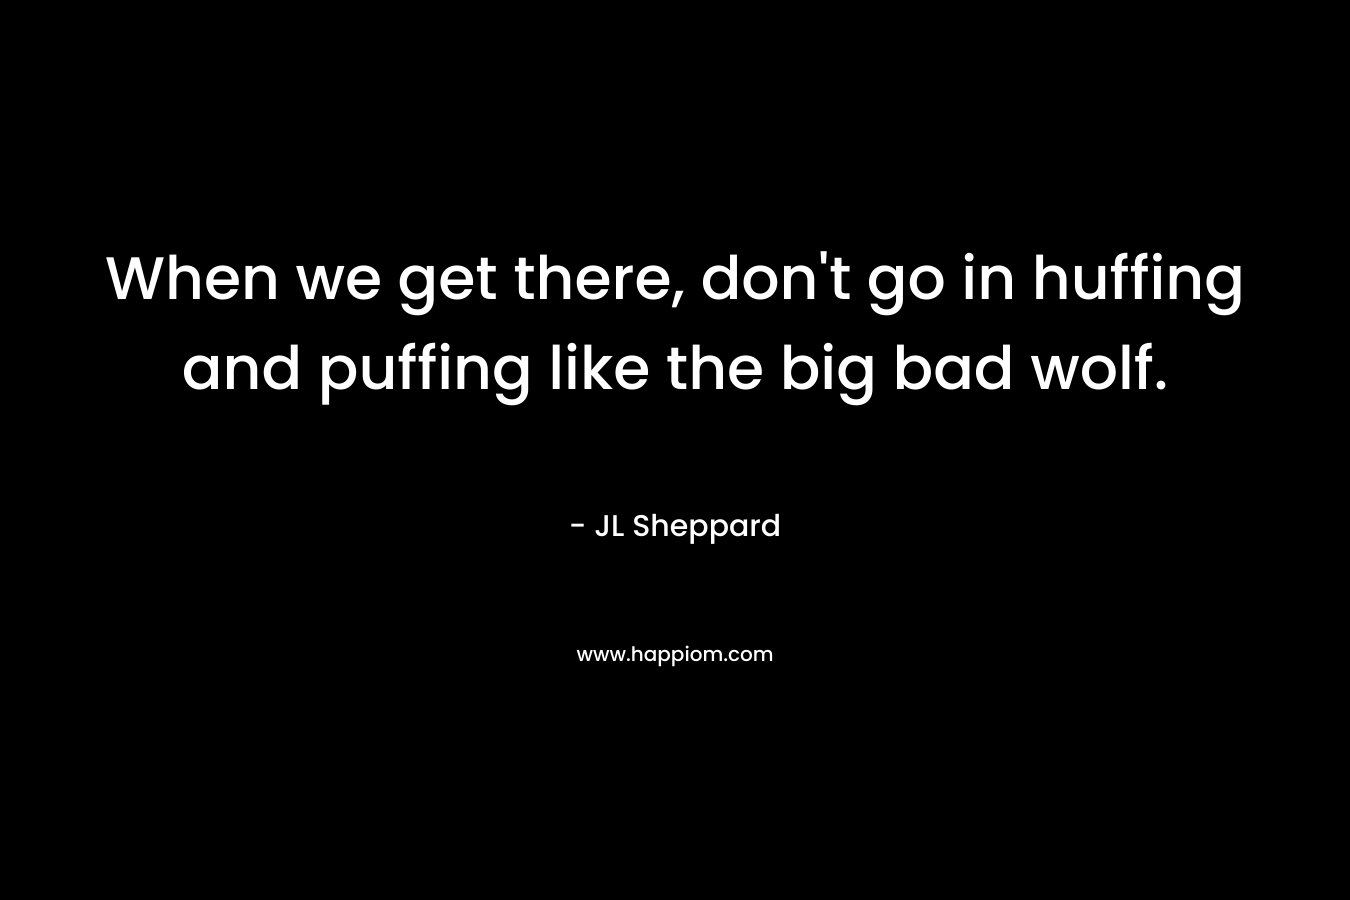 When we get there, don’t go in huffing and puffing like the big bad wolf. – JL Sheppard